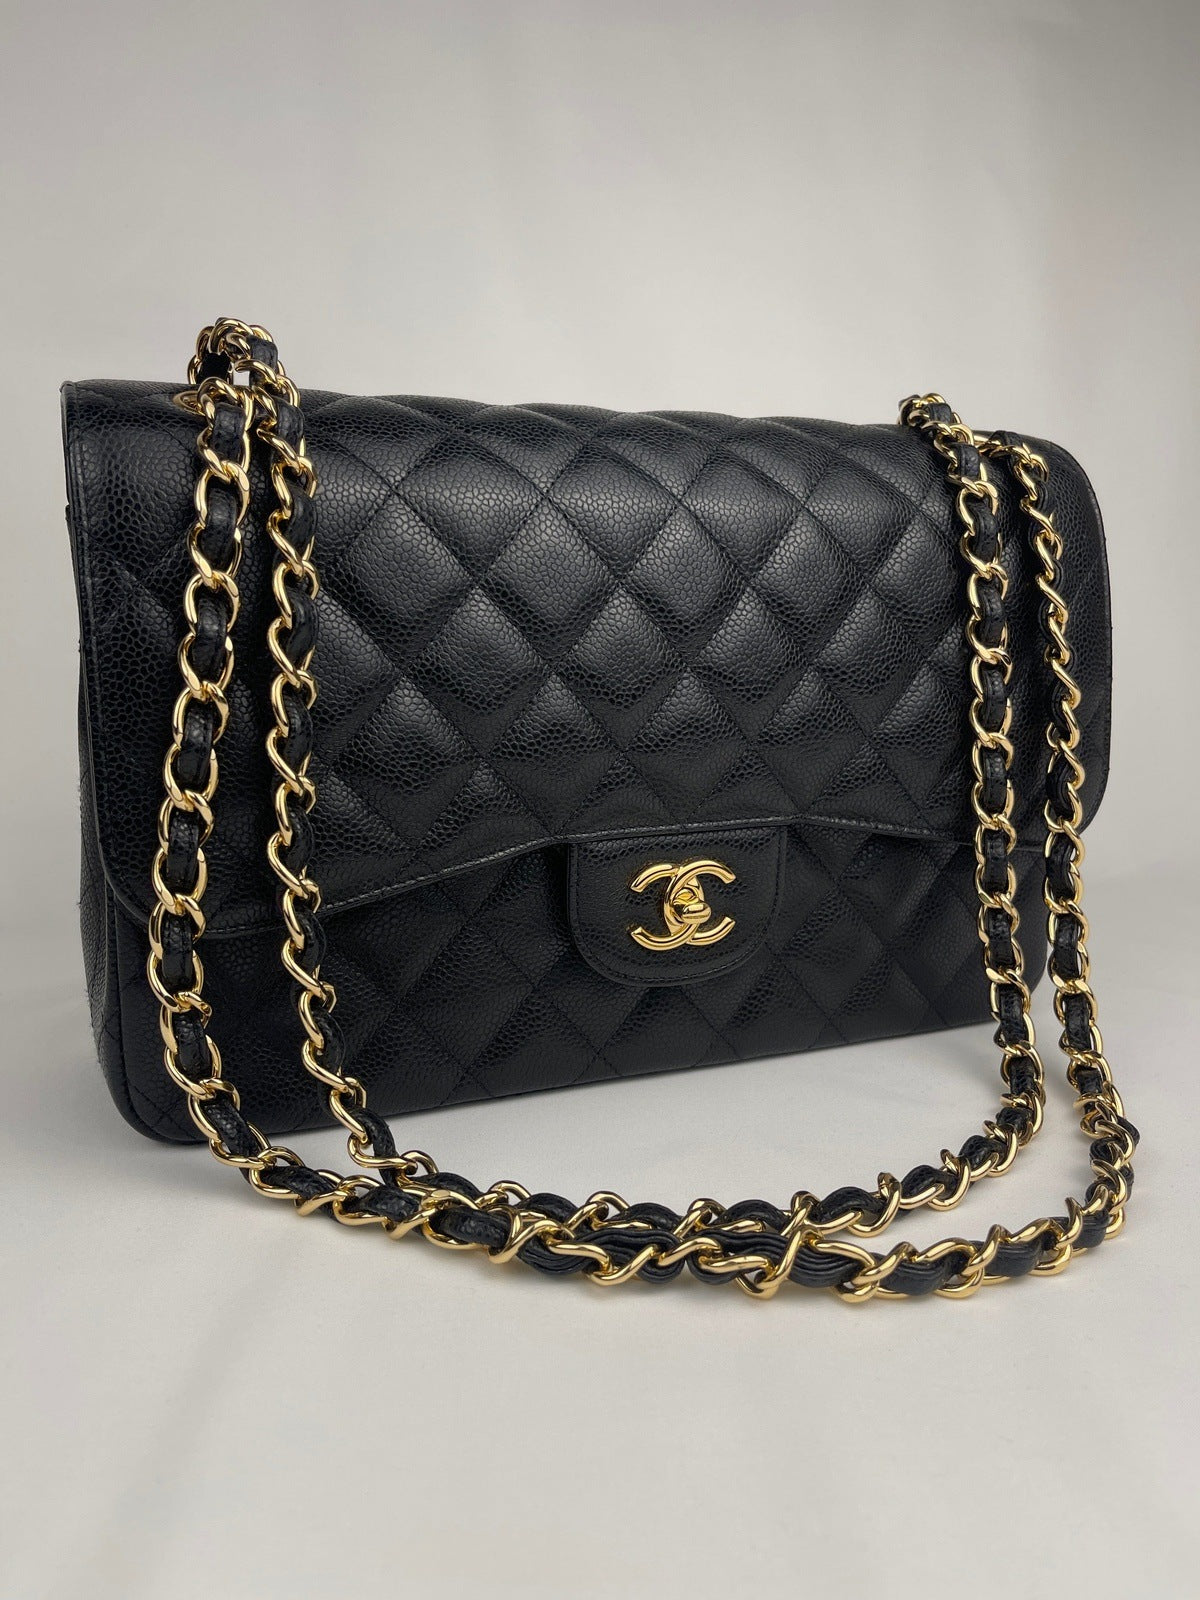 Buy Exclusive Metallic Silver Chanel Classic Flap at REDELUXE - Luxurious Pre-owned Handbags on Sale!